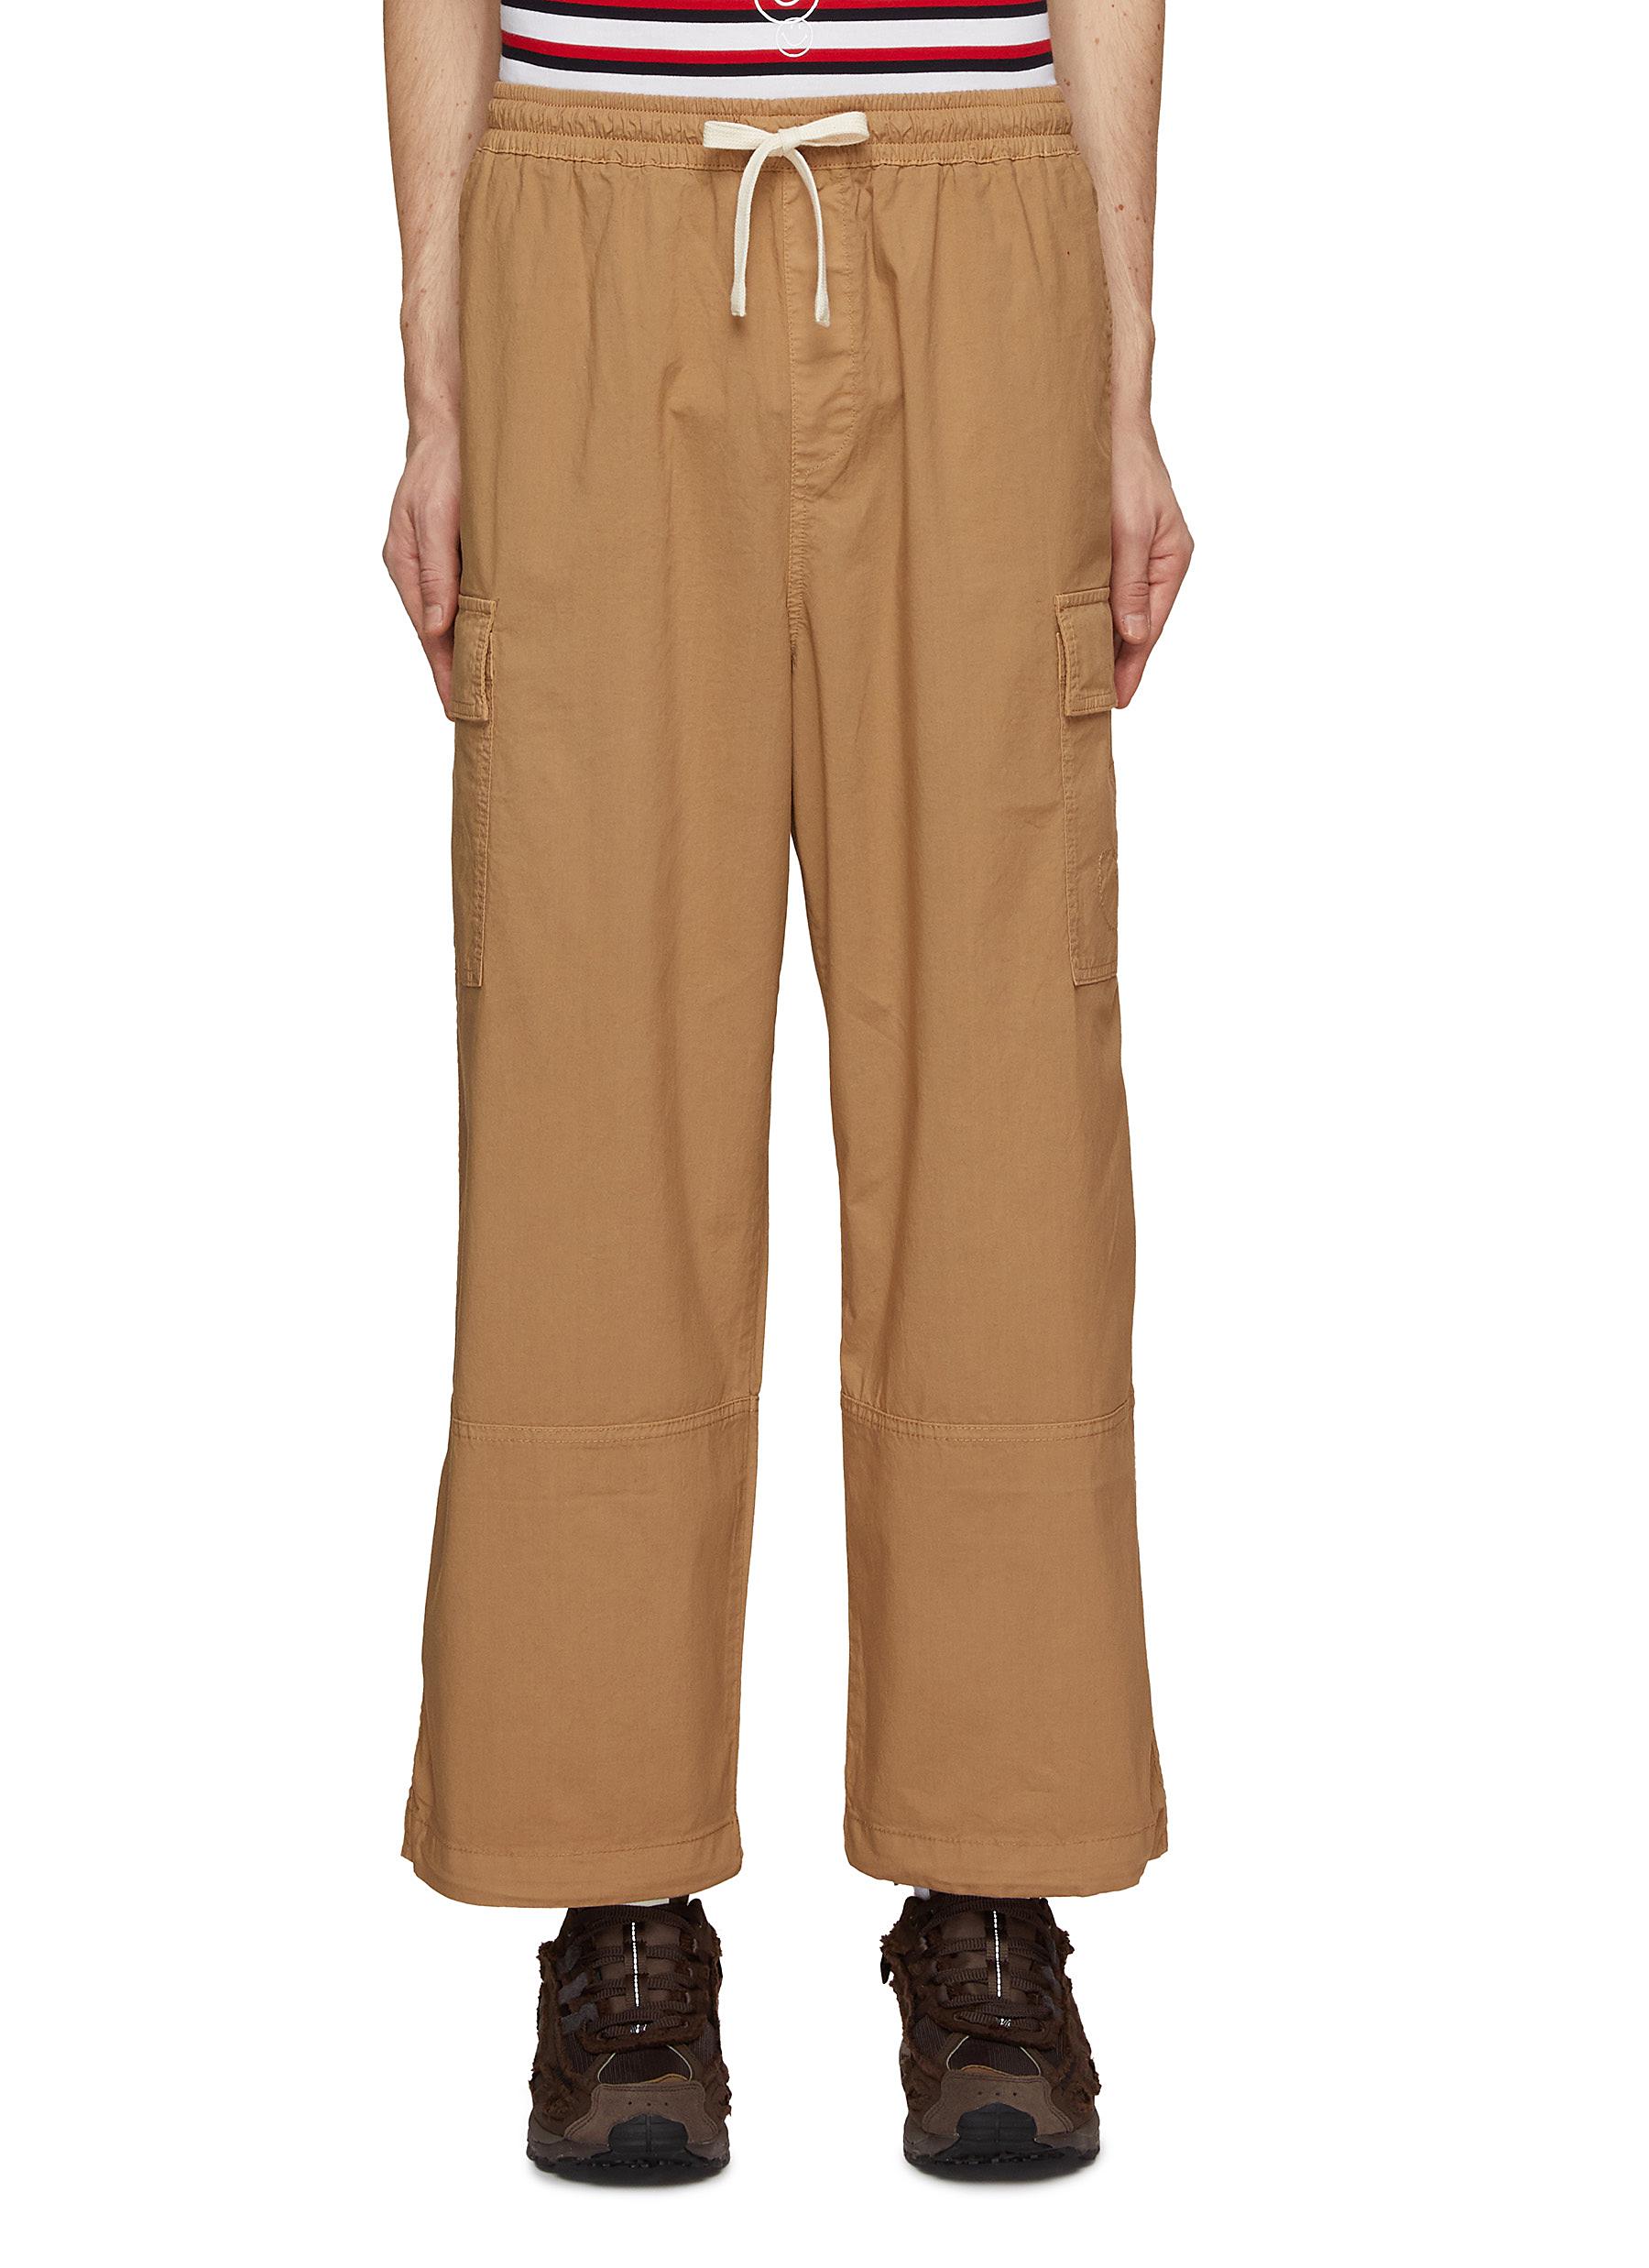 ESSSUT999 Women's Solid Color Drawstring Cargo Pants with India | Ubuy